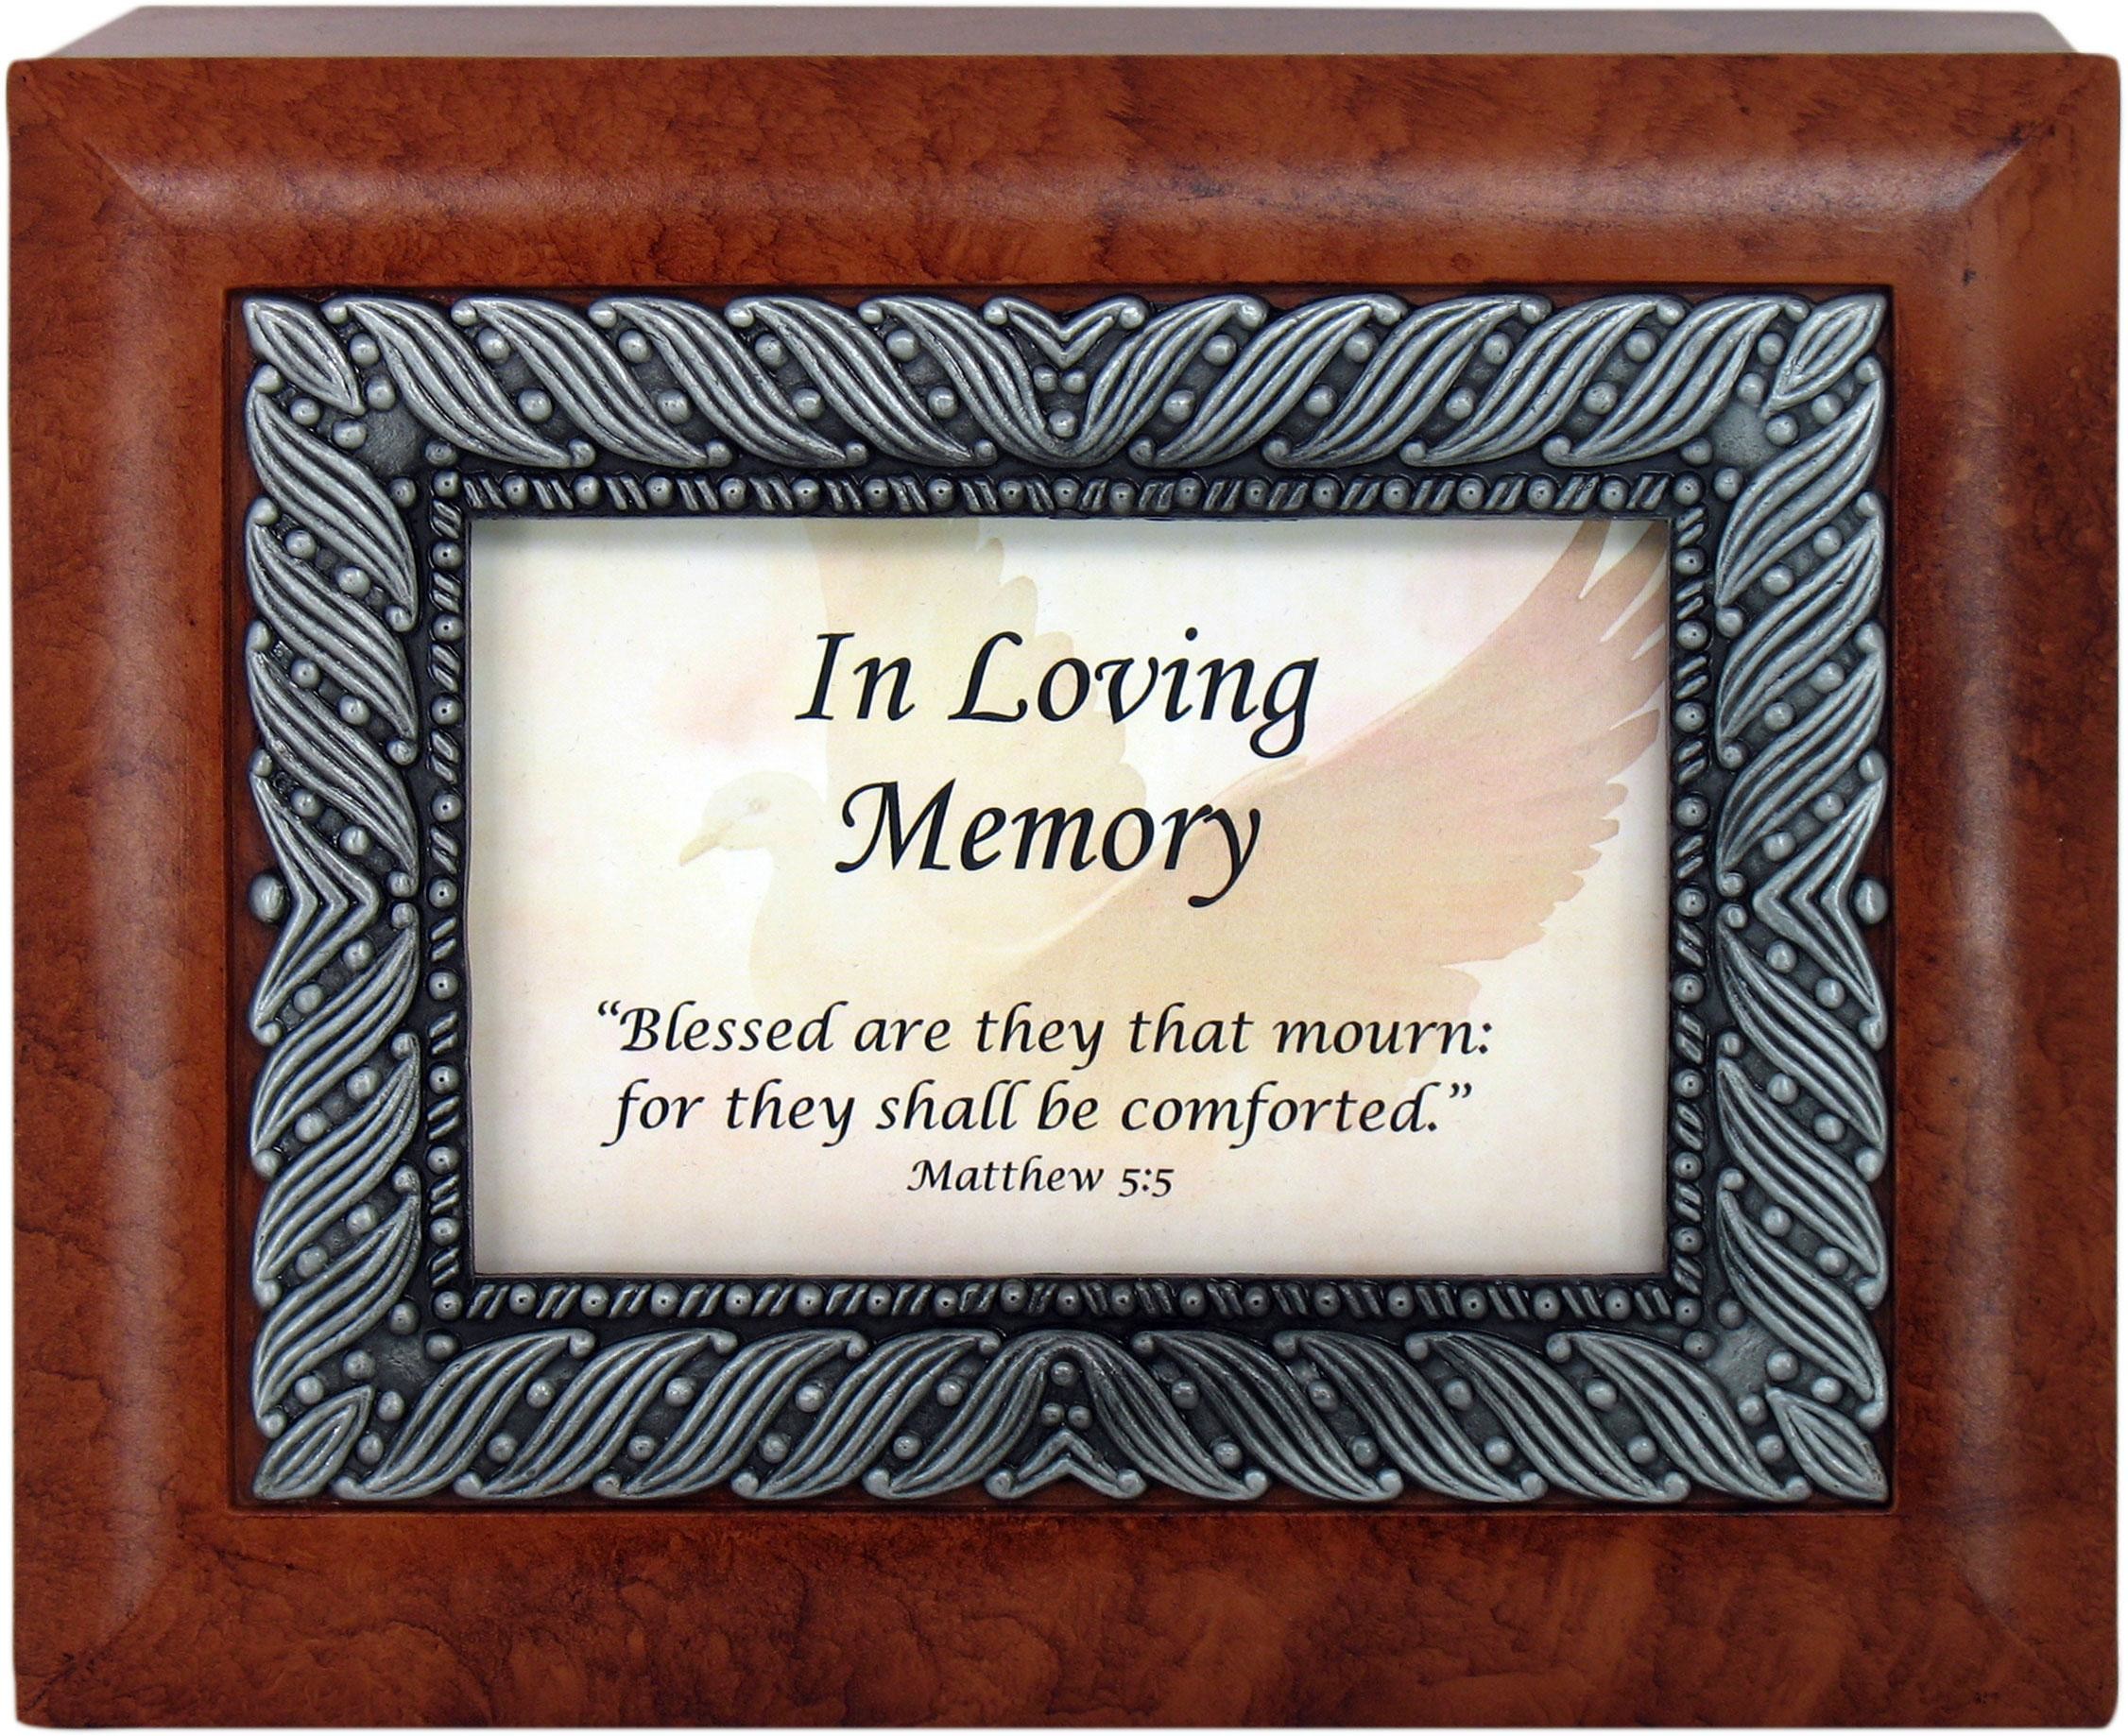 2252x1837 Persons can make it more affectionate by In Loving Memory Personalized  Memorial Wood Plaque, memorial gifts & memorial frames are great ways to  remember a ...